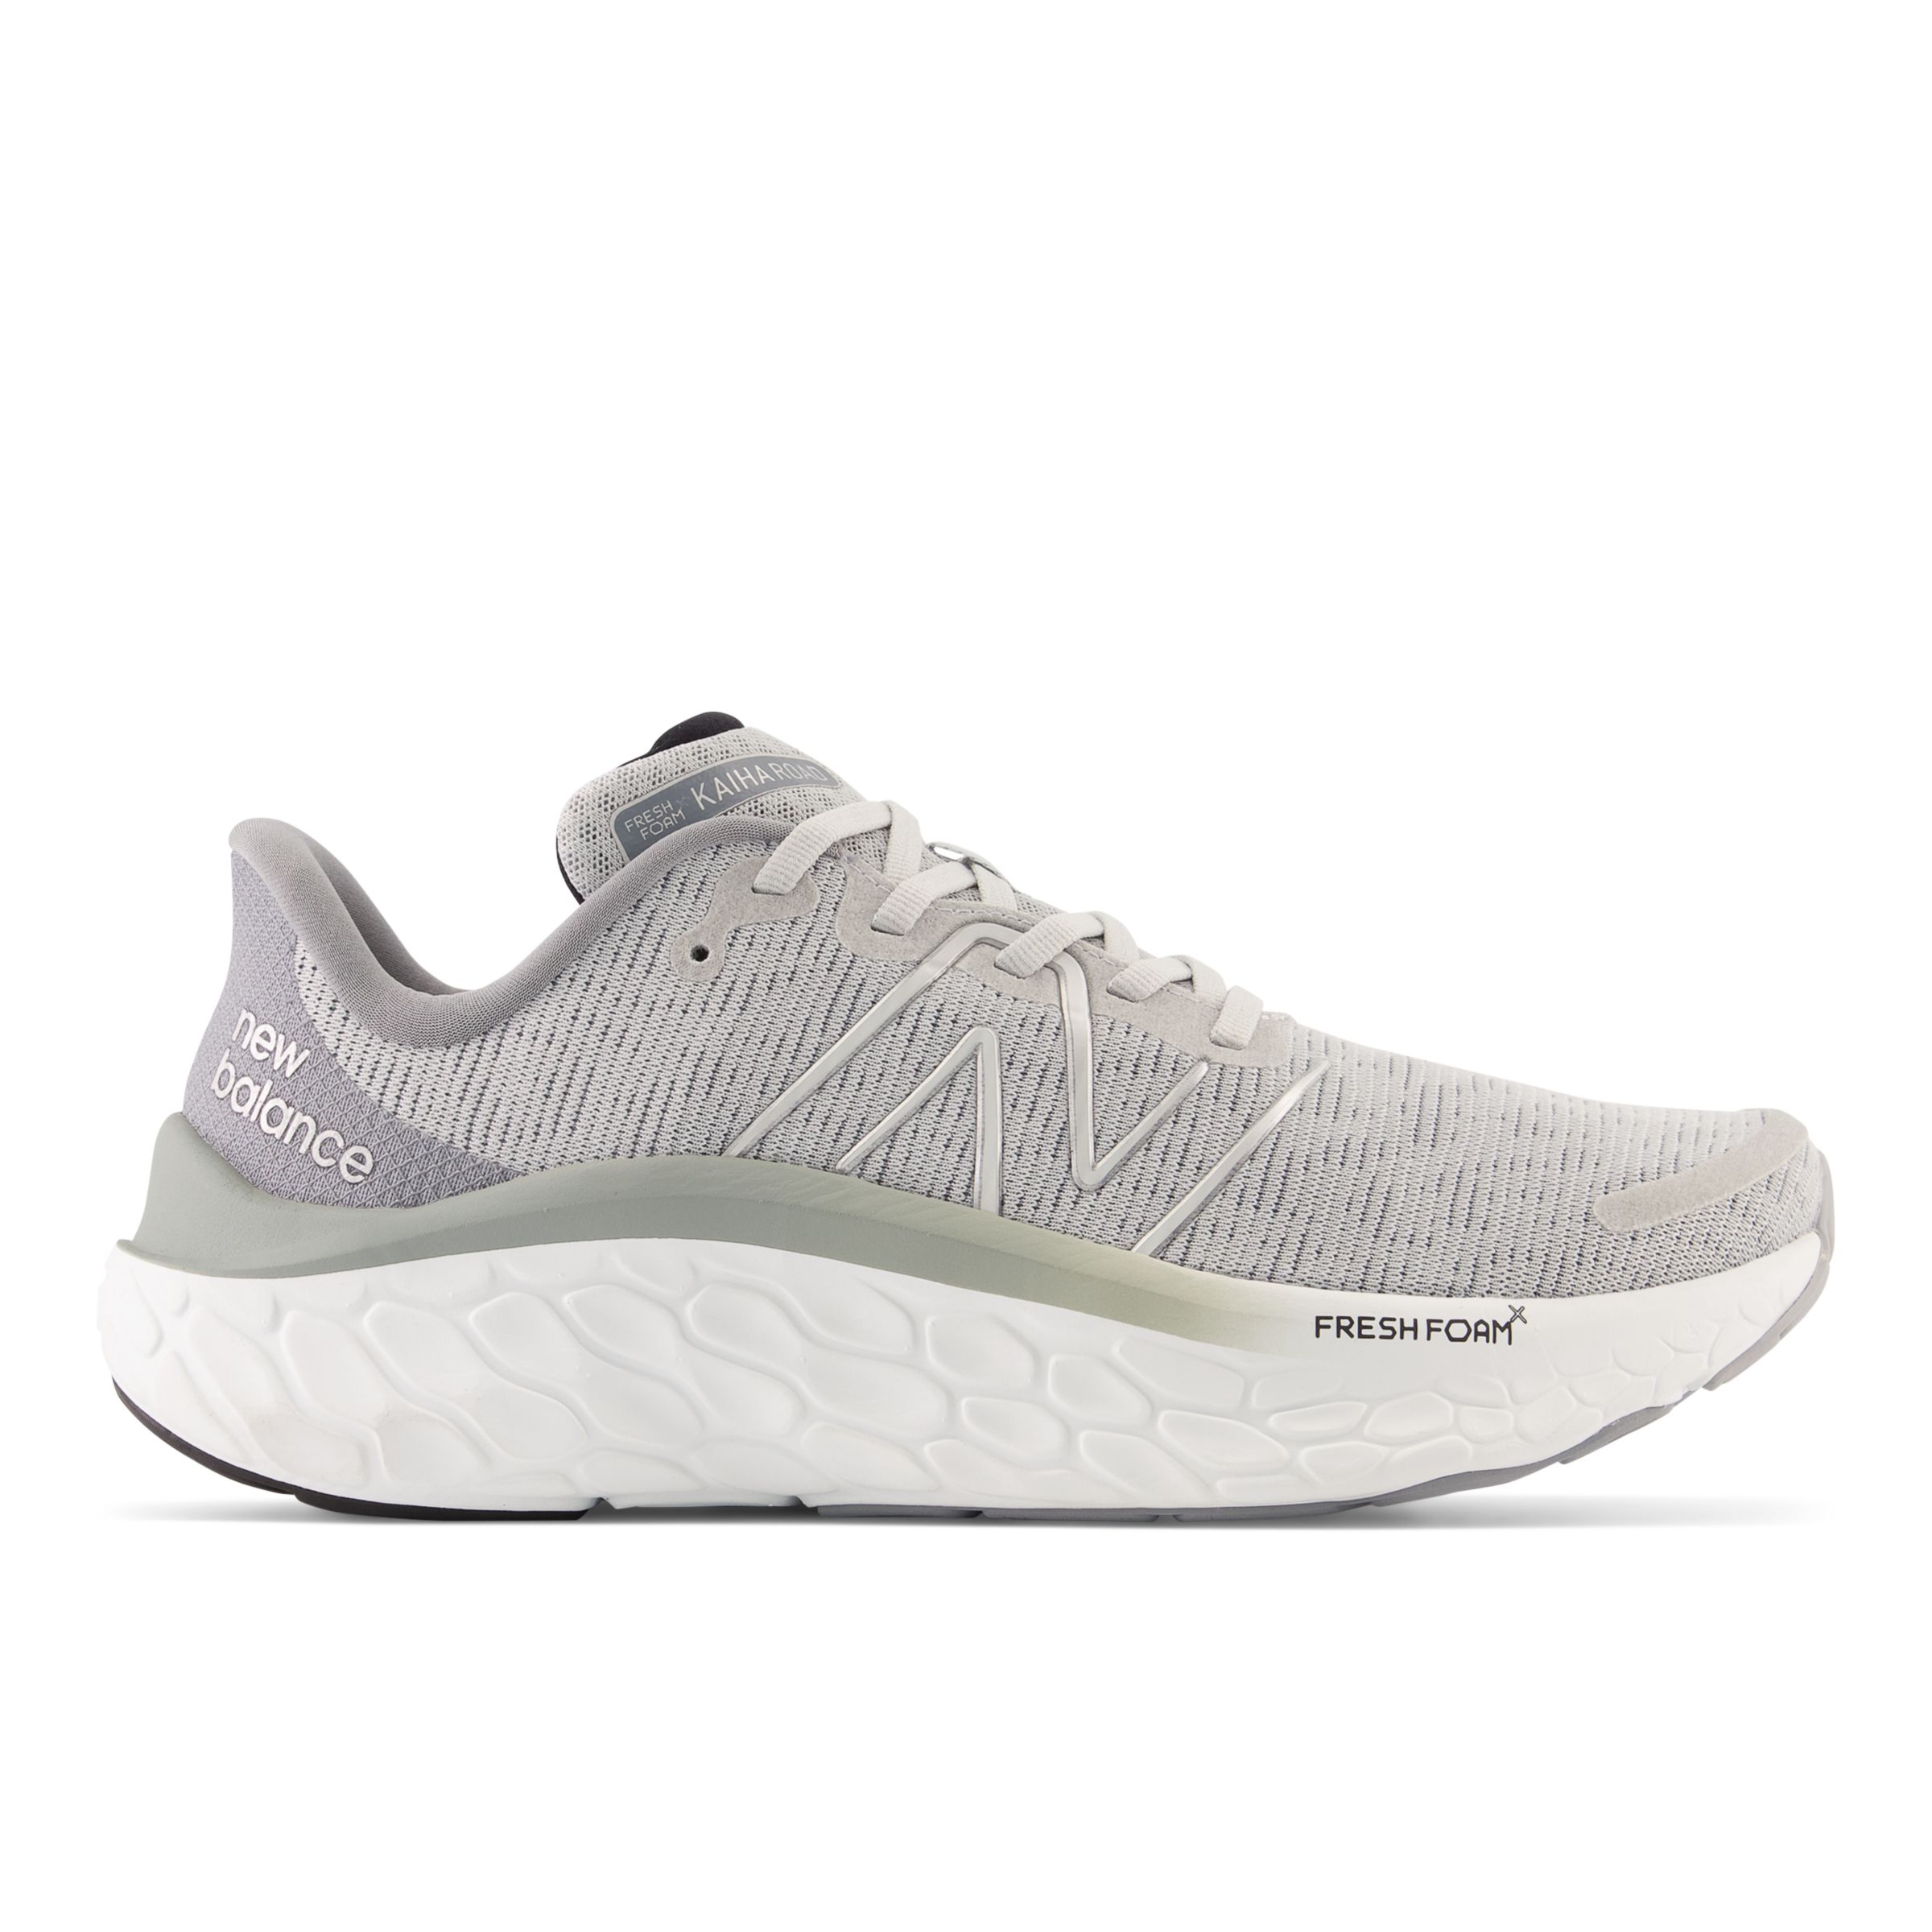 New Balance Homme FRESH FOAM X KAIHA RD en Gris, Synthetic, Taille 40.5 Large